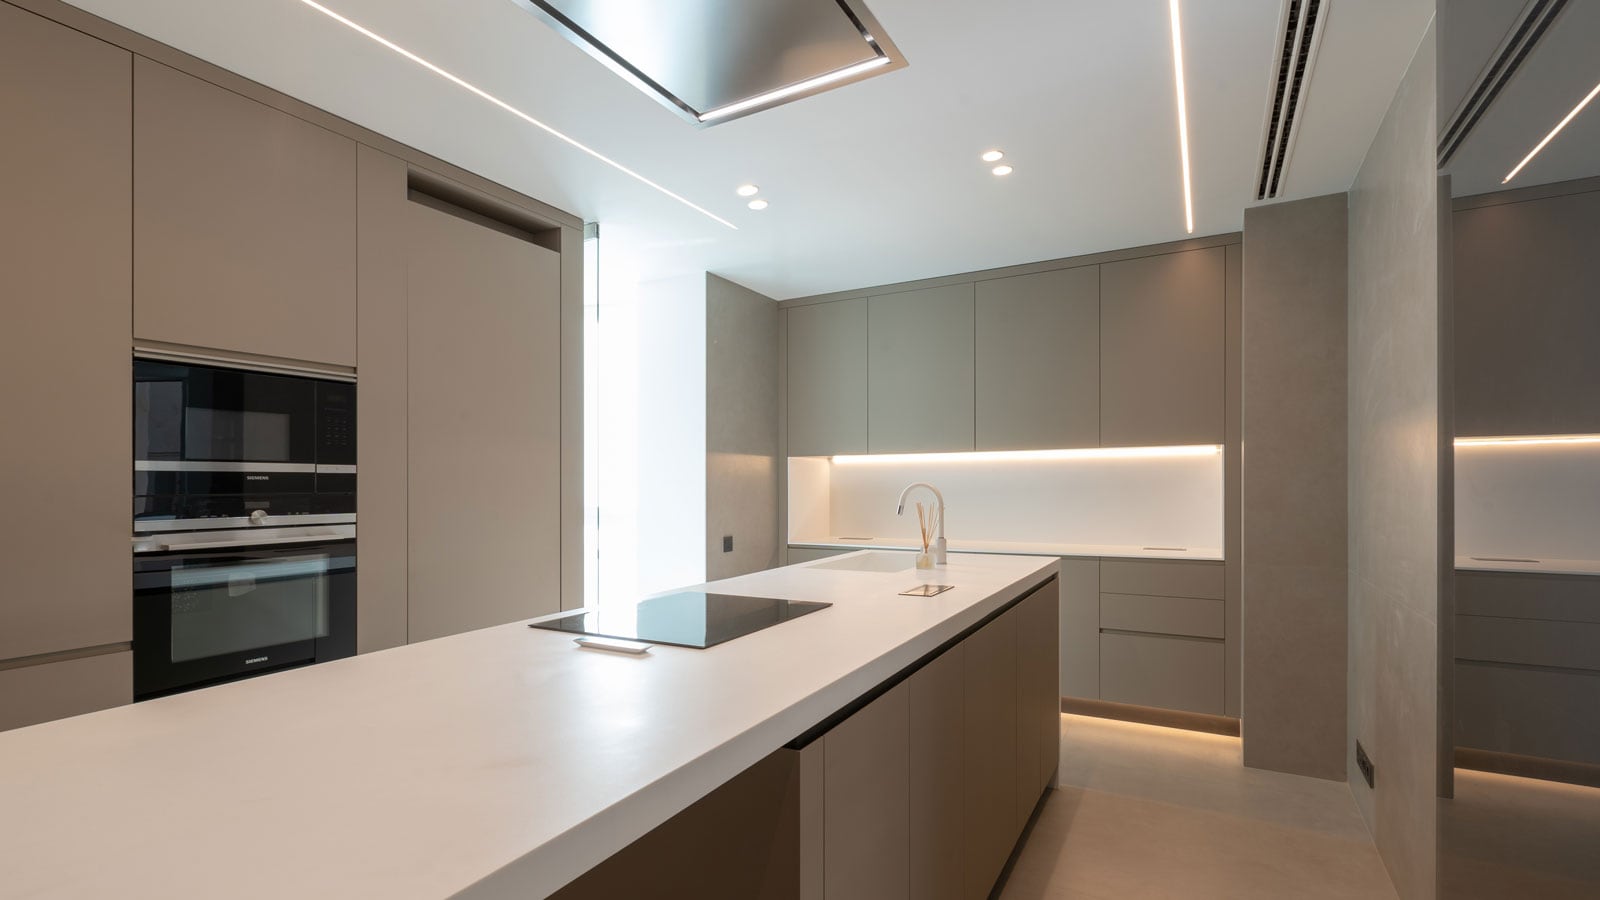 A modern and welcoming home on Paseo de la Castellana